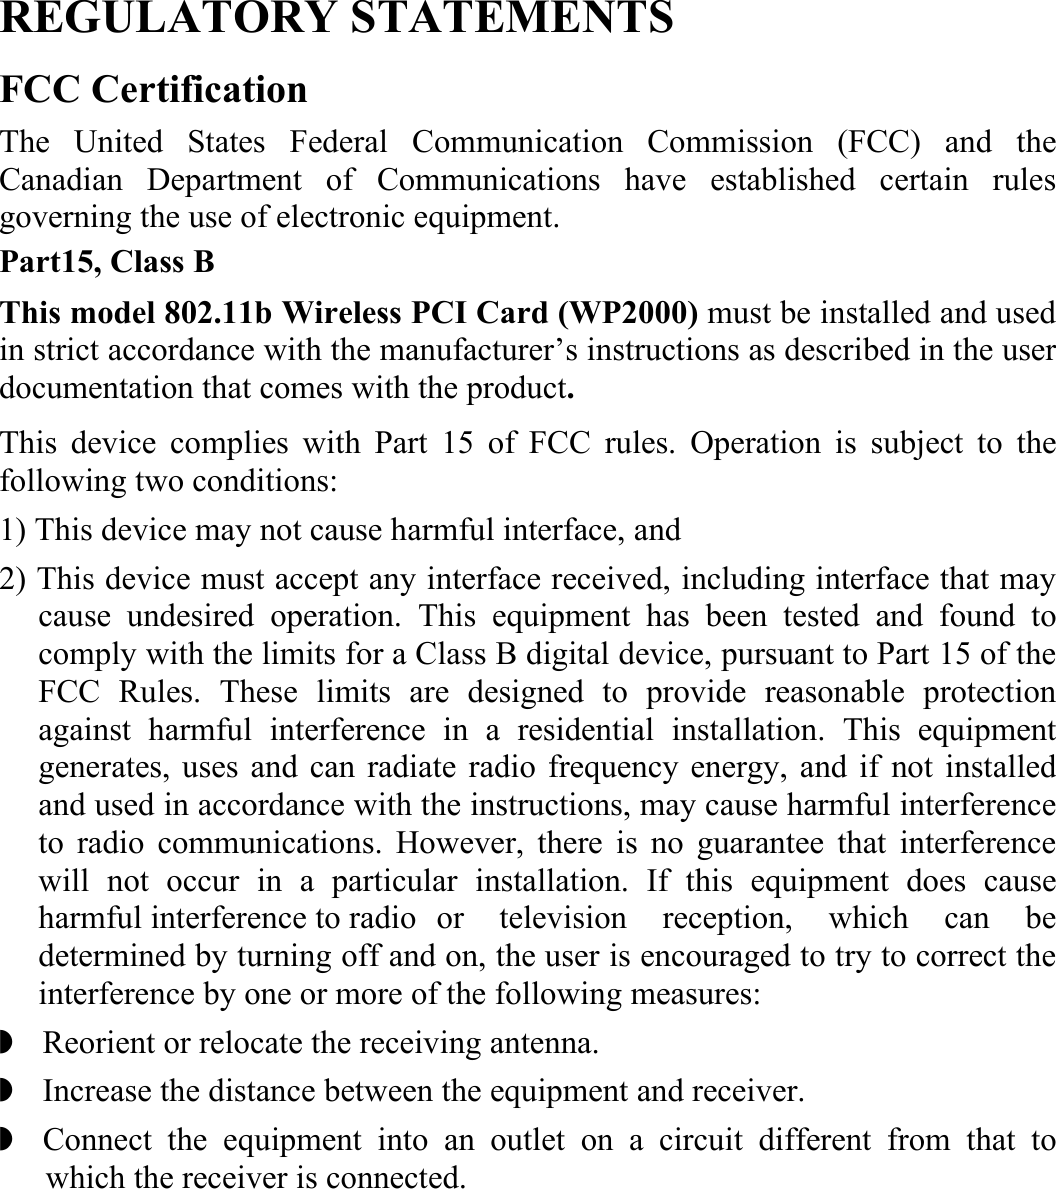  REGULATORY STATEMENTS FCC Certification The United States Federal Communication Commission (FCC) and the Canadian Department of Communications have established certain rules governing the use of electronic equipment. Part15, Class B This model 802.11b Wireless PCI Card (WP2000) must be installed and used in strict accordance with the manufacturer’s instructions as described in the user documentation that comes with the product.   This device complies with Part 15 of FCC rules. Operation is subject to the following two conditions: 1) This device may not cause harmful interface, and 2) This device must accept any interface received, including interface that may cause undesired operation. This equipment has been tested and found to comply with the limits for a Class B digital device, pursuant to Part 15 of the FCC Rules. These limits are designed to provide reasonable protection against harmful interference in a residential installation. This equipment generates, uses and can radiate radio frequency energy, and if not installed and used in accordance with the instructions, may cause harmful interference to radio communications. However, there is no guarantee that interference will not occur in a particular installation. If this equipment does cause harmful interference to radio   or  television reception, which can be determined by turning off and on, the user is encouraged to try to correct the interference by one or more of the following measures: ◗    Reorient or relocate the receiving antenna. ◗    Increase the distance between the equipment and receiver. ◗  Connect the equipment into an outlet on a circuit different from that to which the receiver is connected. 